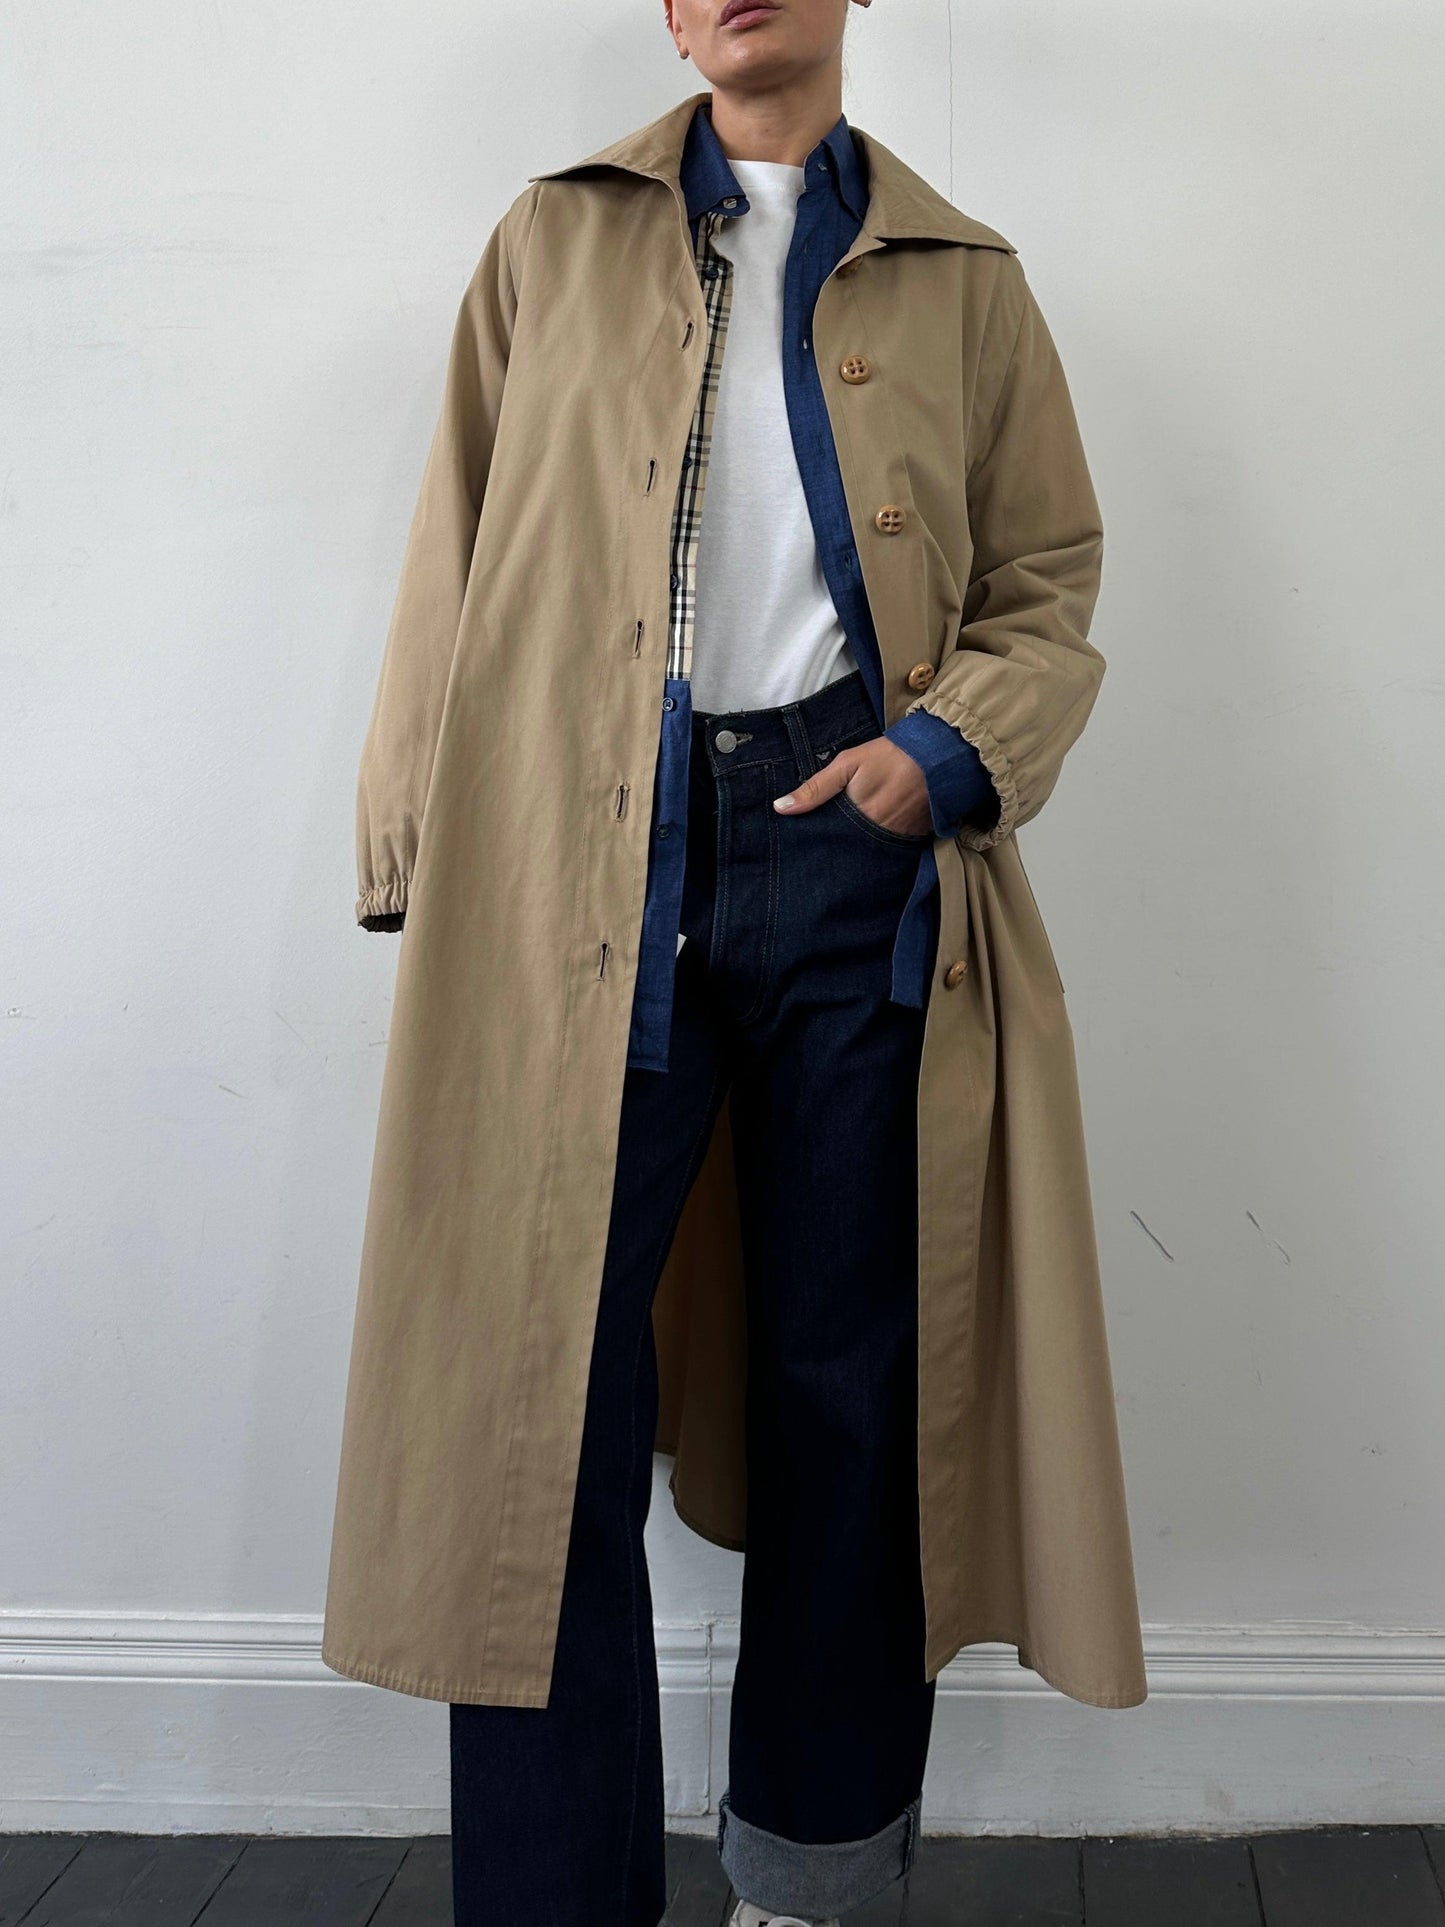 Vintage A-Line Cotton Single Breasted Trench Coat - M - Known Source